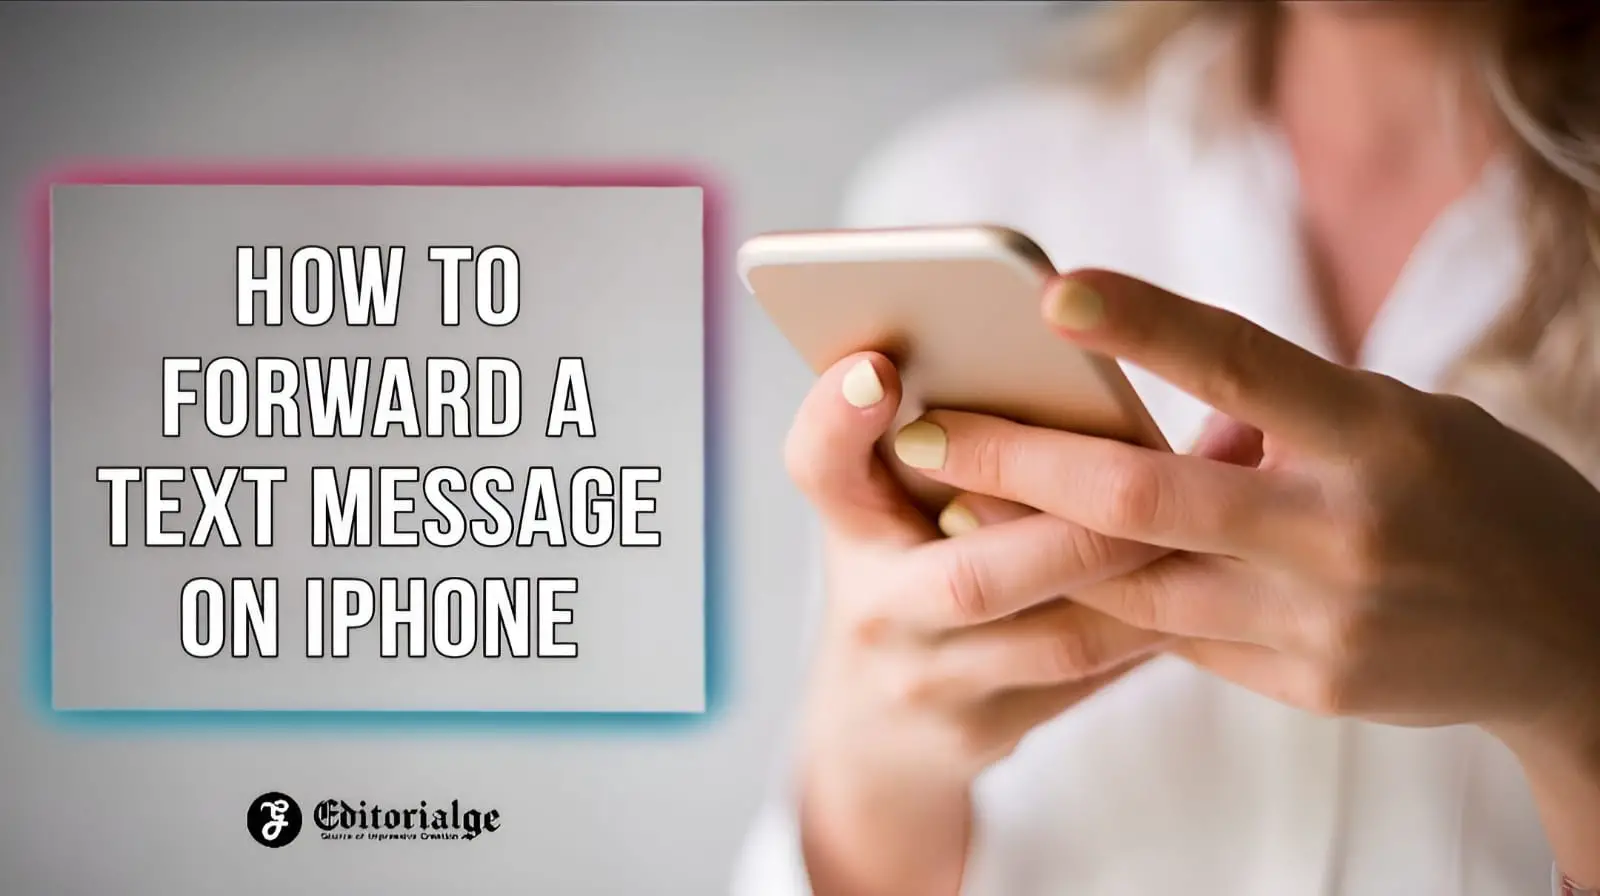 How to forward a text message on iPhone